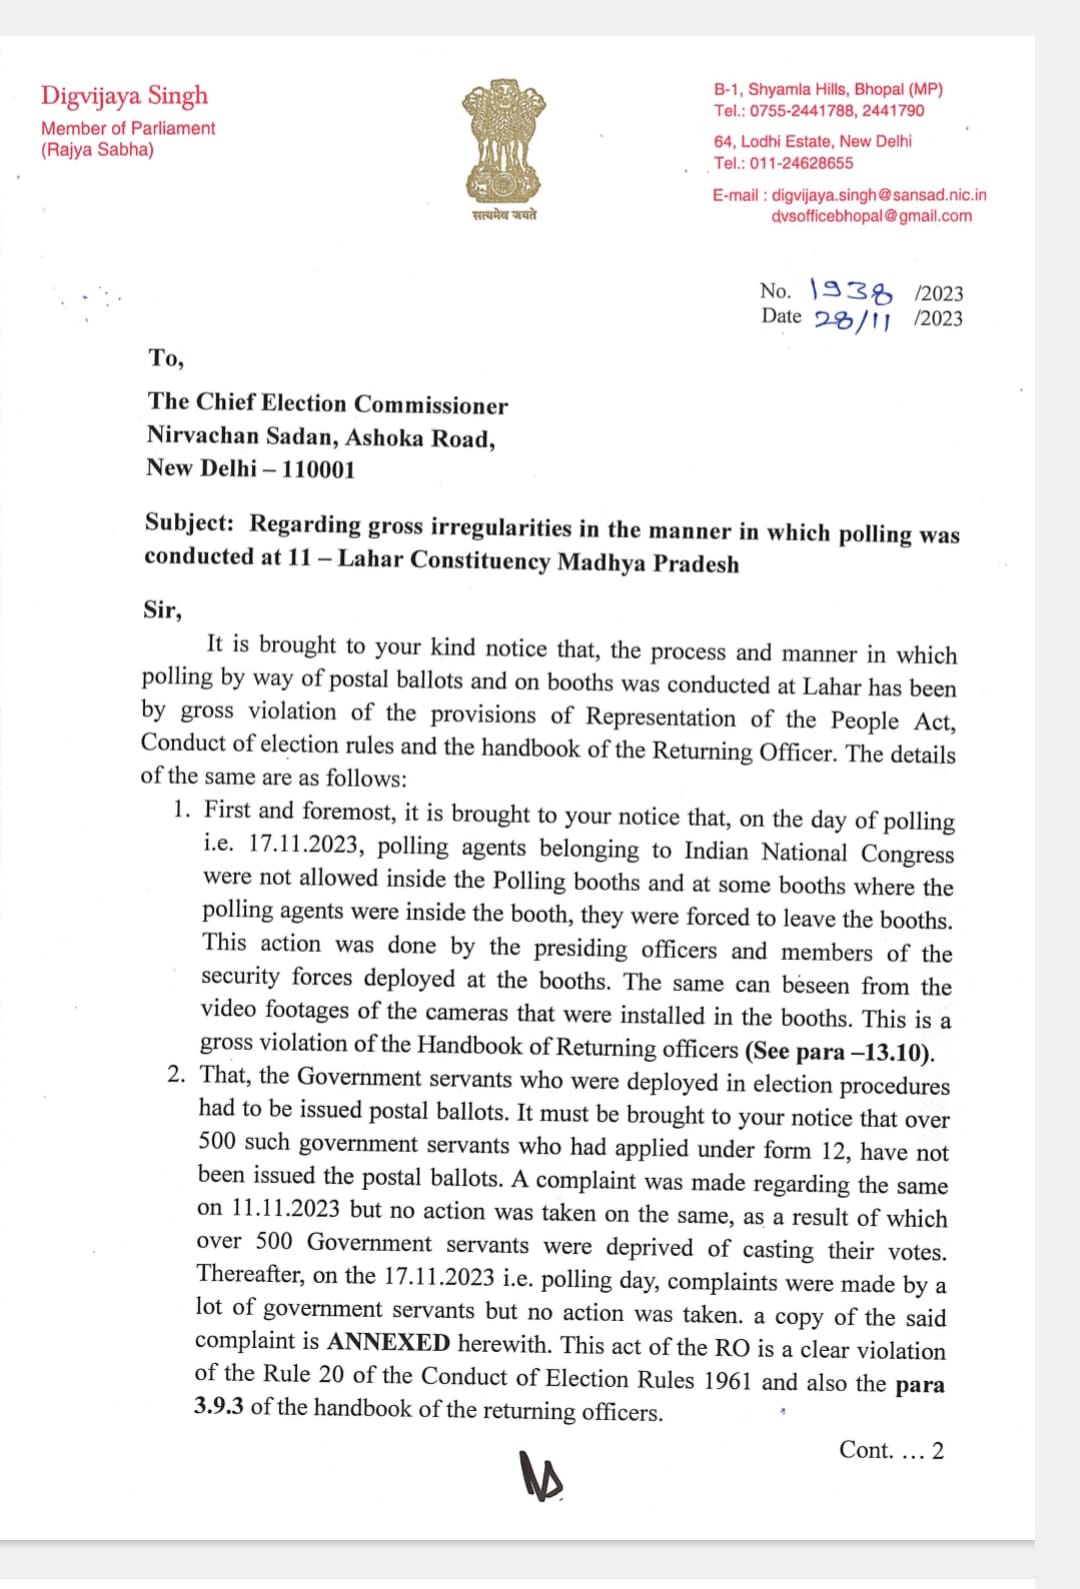 Digvijay Singh letter to Election Commission